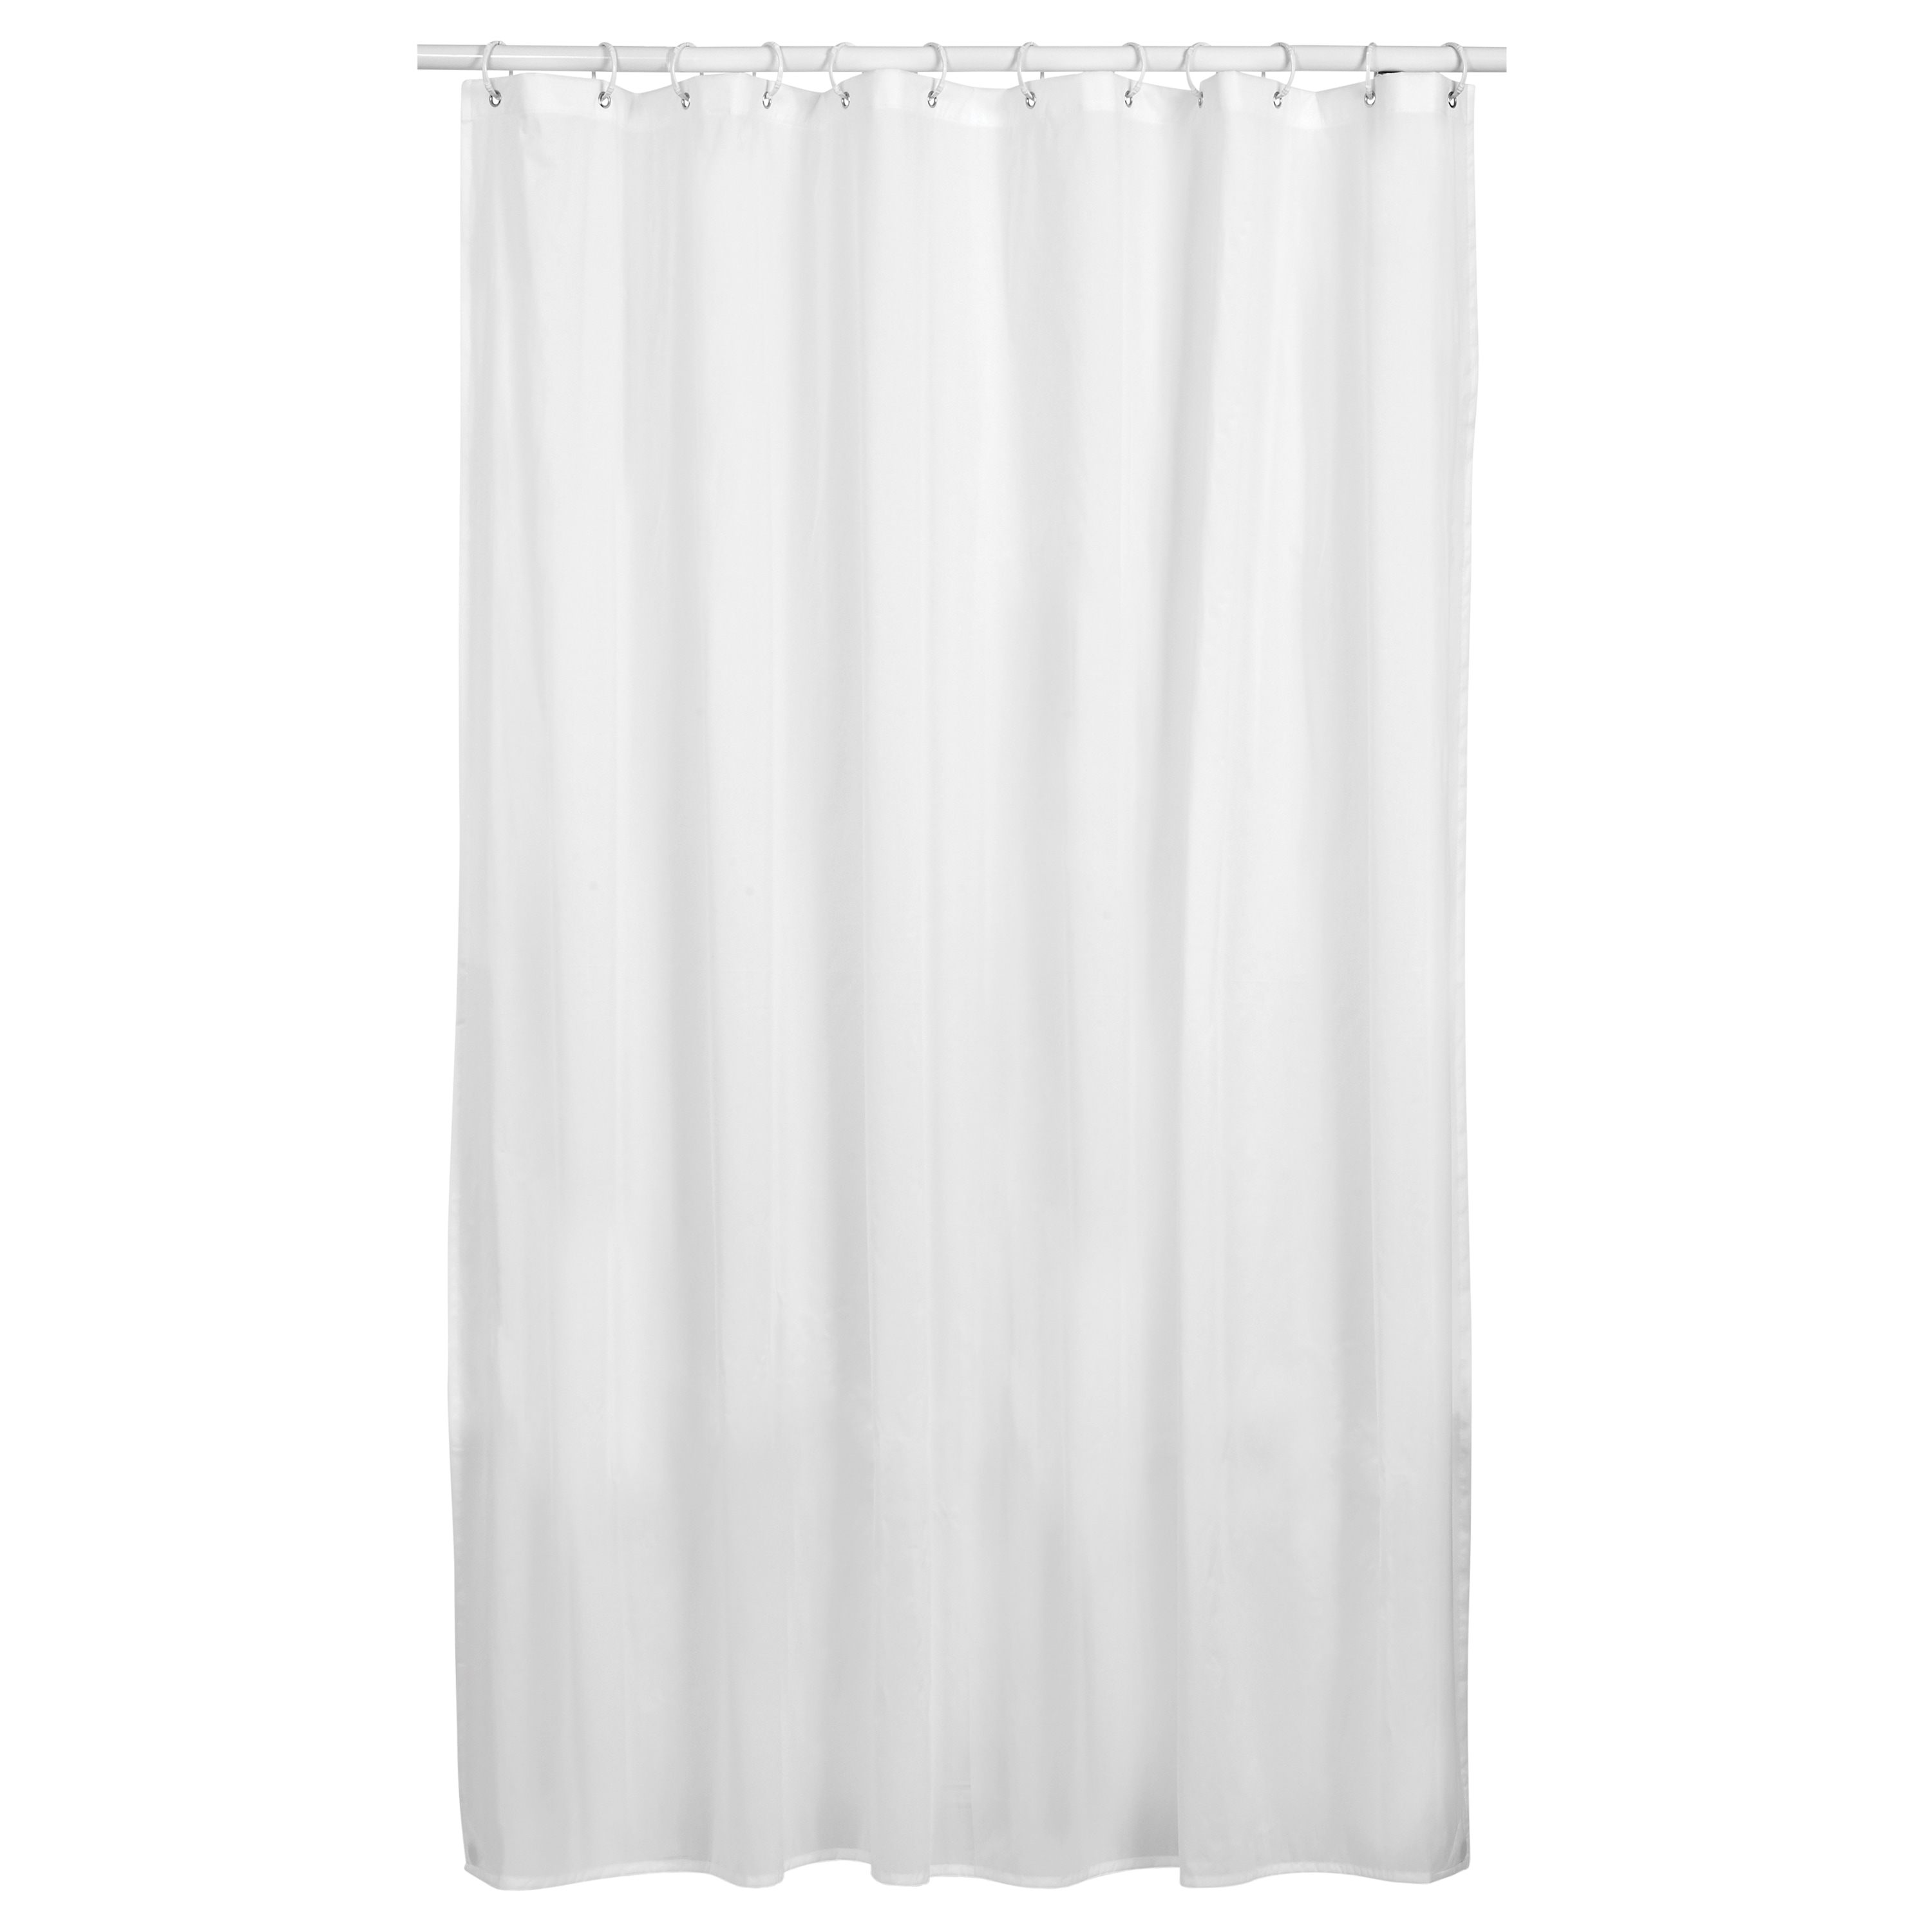 Fabric Shower Curtain or Liner Liner Quality  70" x 72" White 100% Polyester 